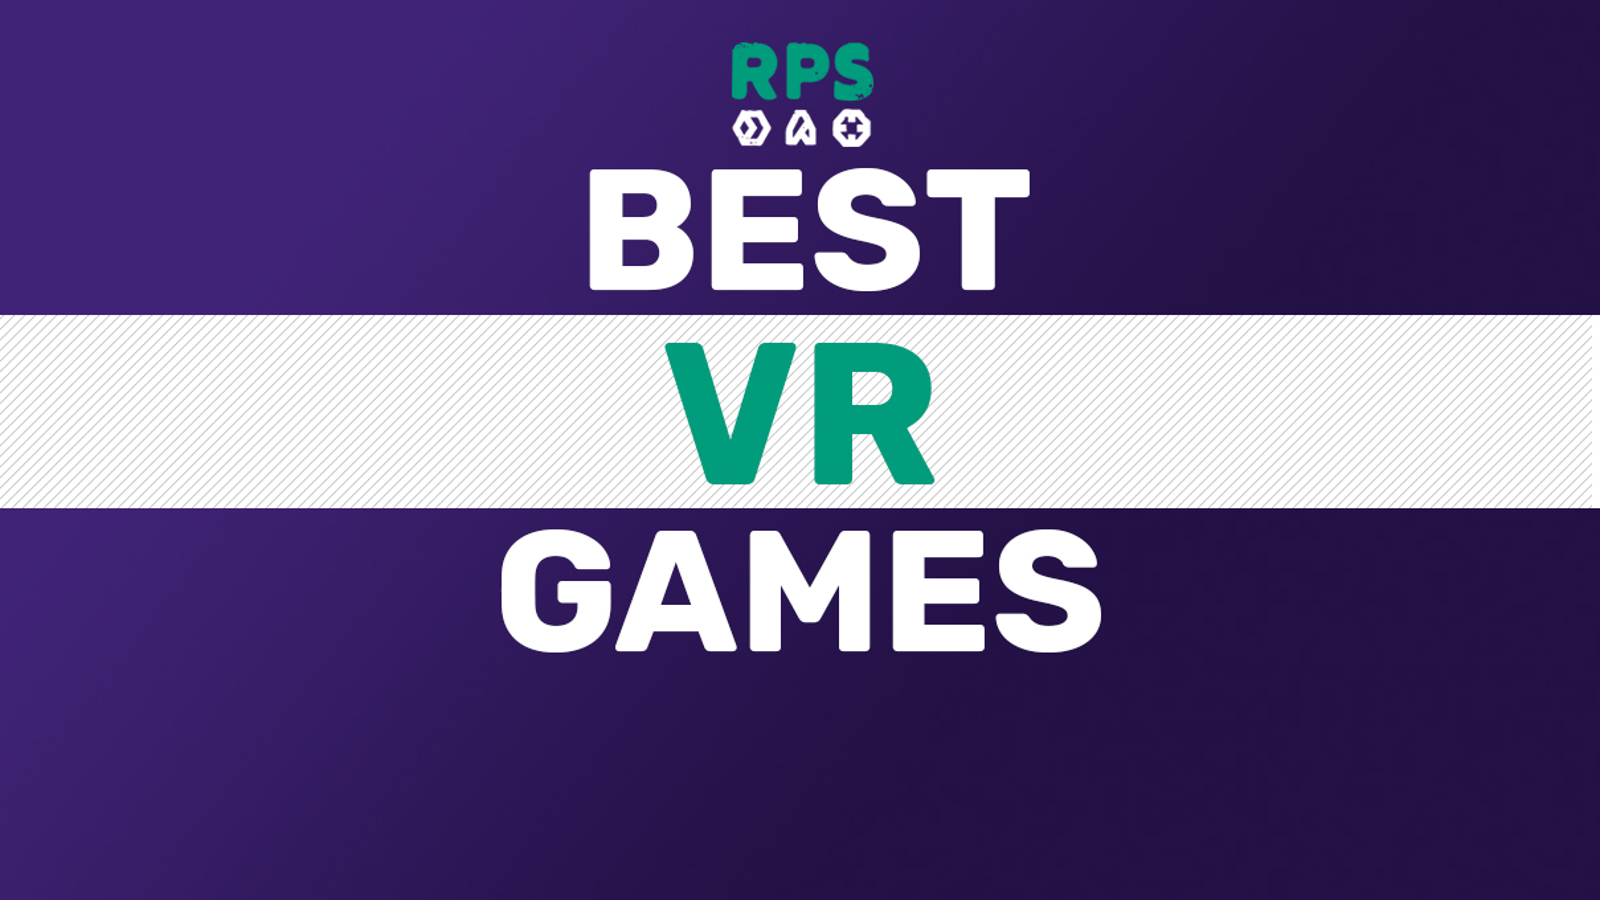 The 20 best VR games for Oculus, Index and Vive